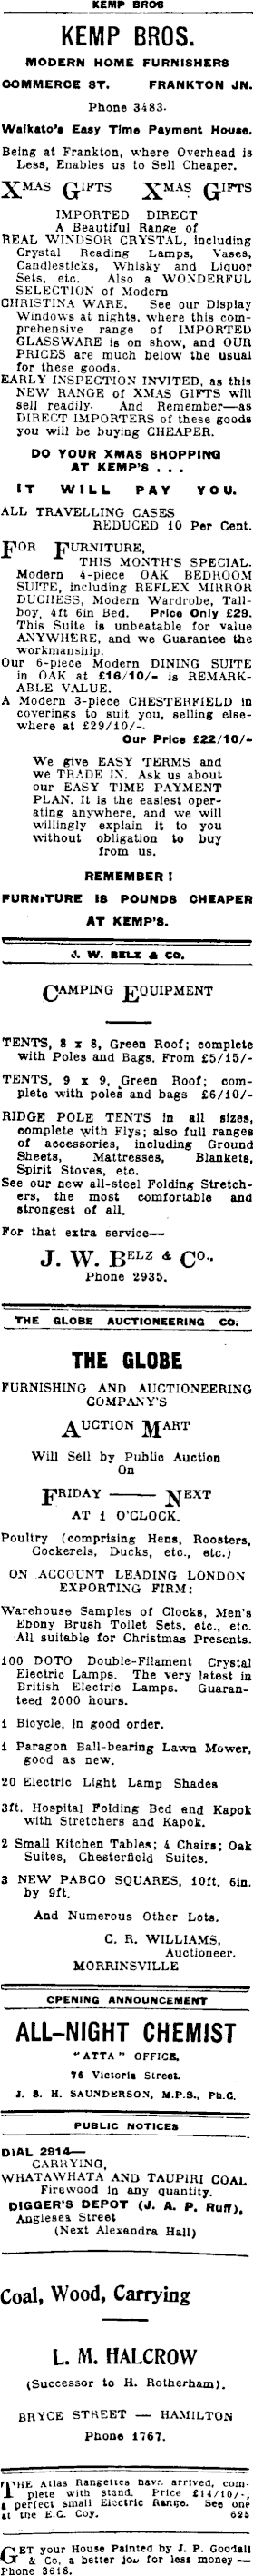 Papers Past Newspapers Waikato Times 22 December 1938 Page 2 Advertisements Column 6